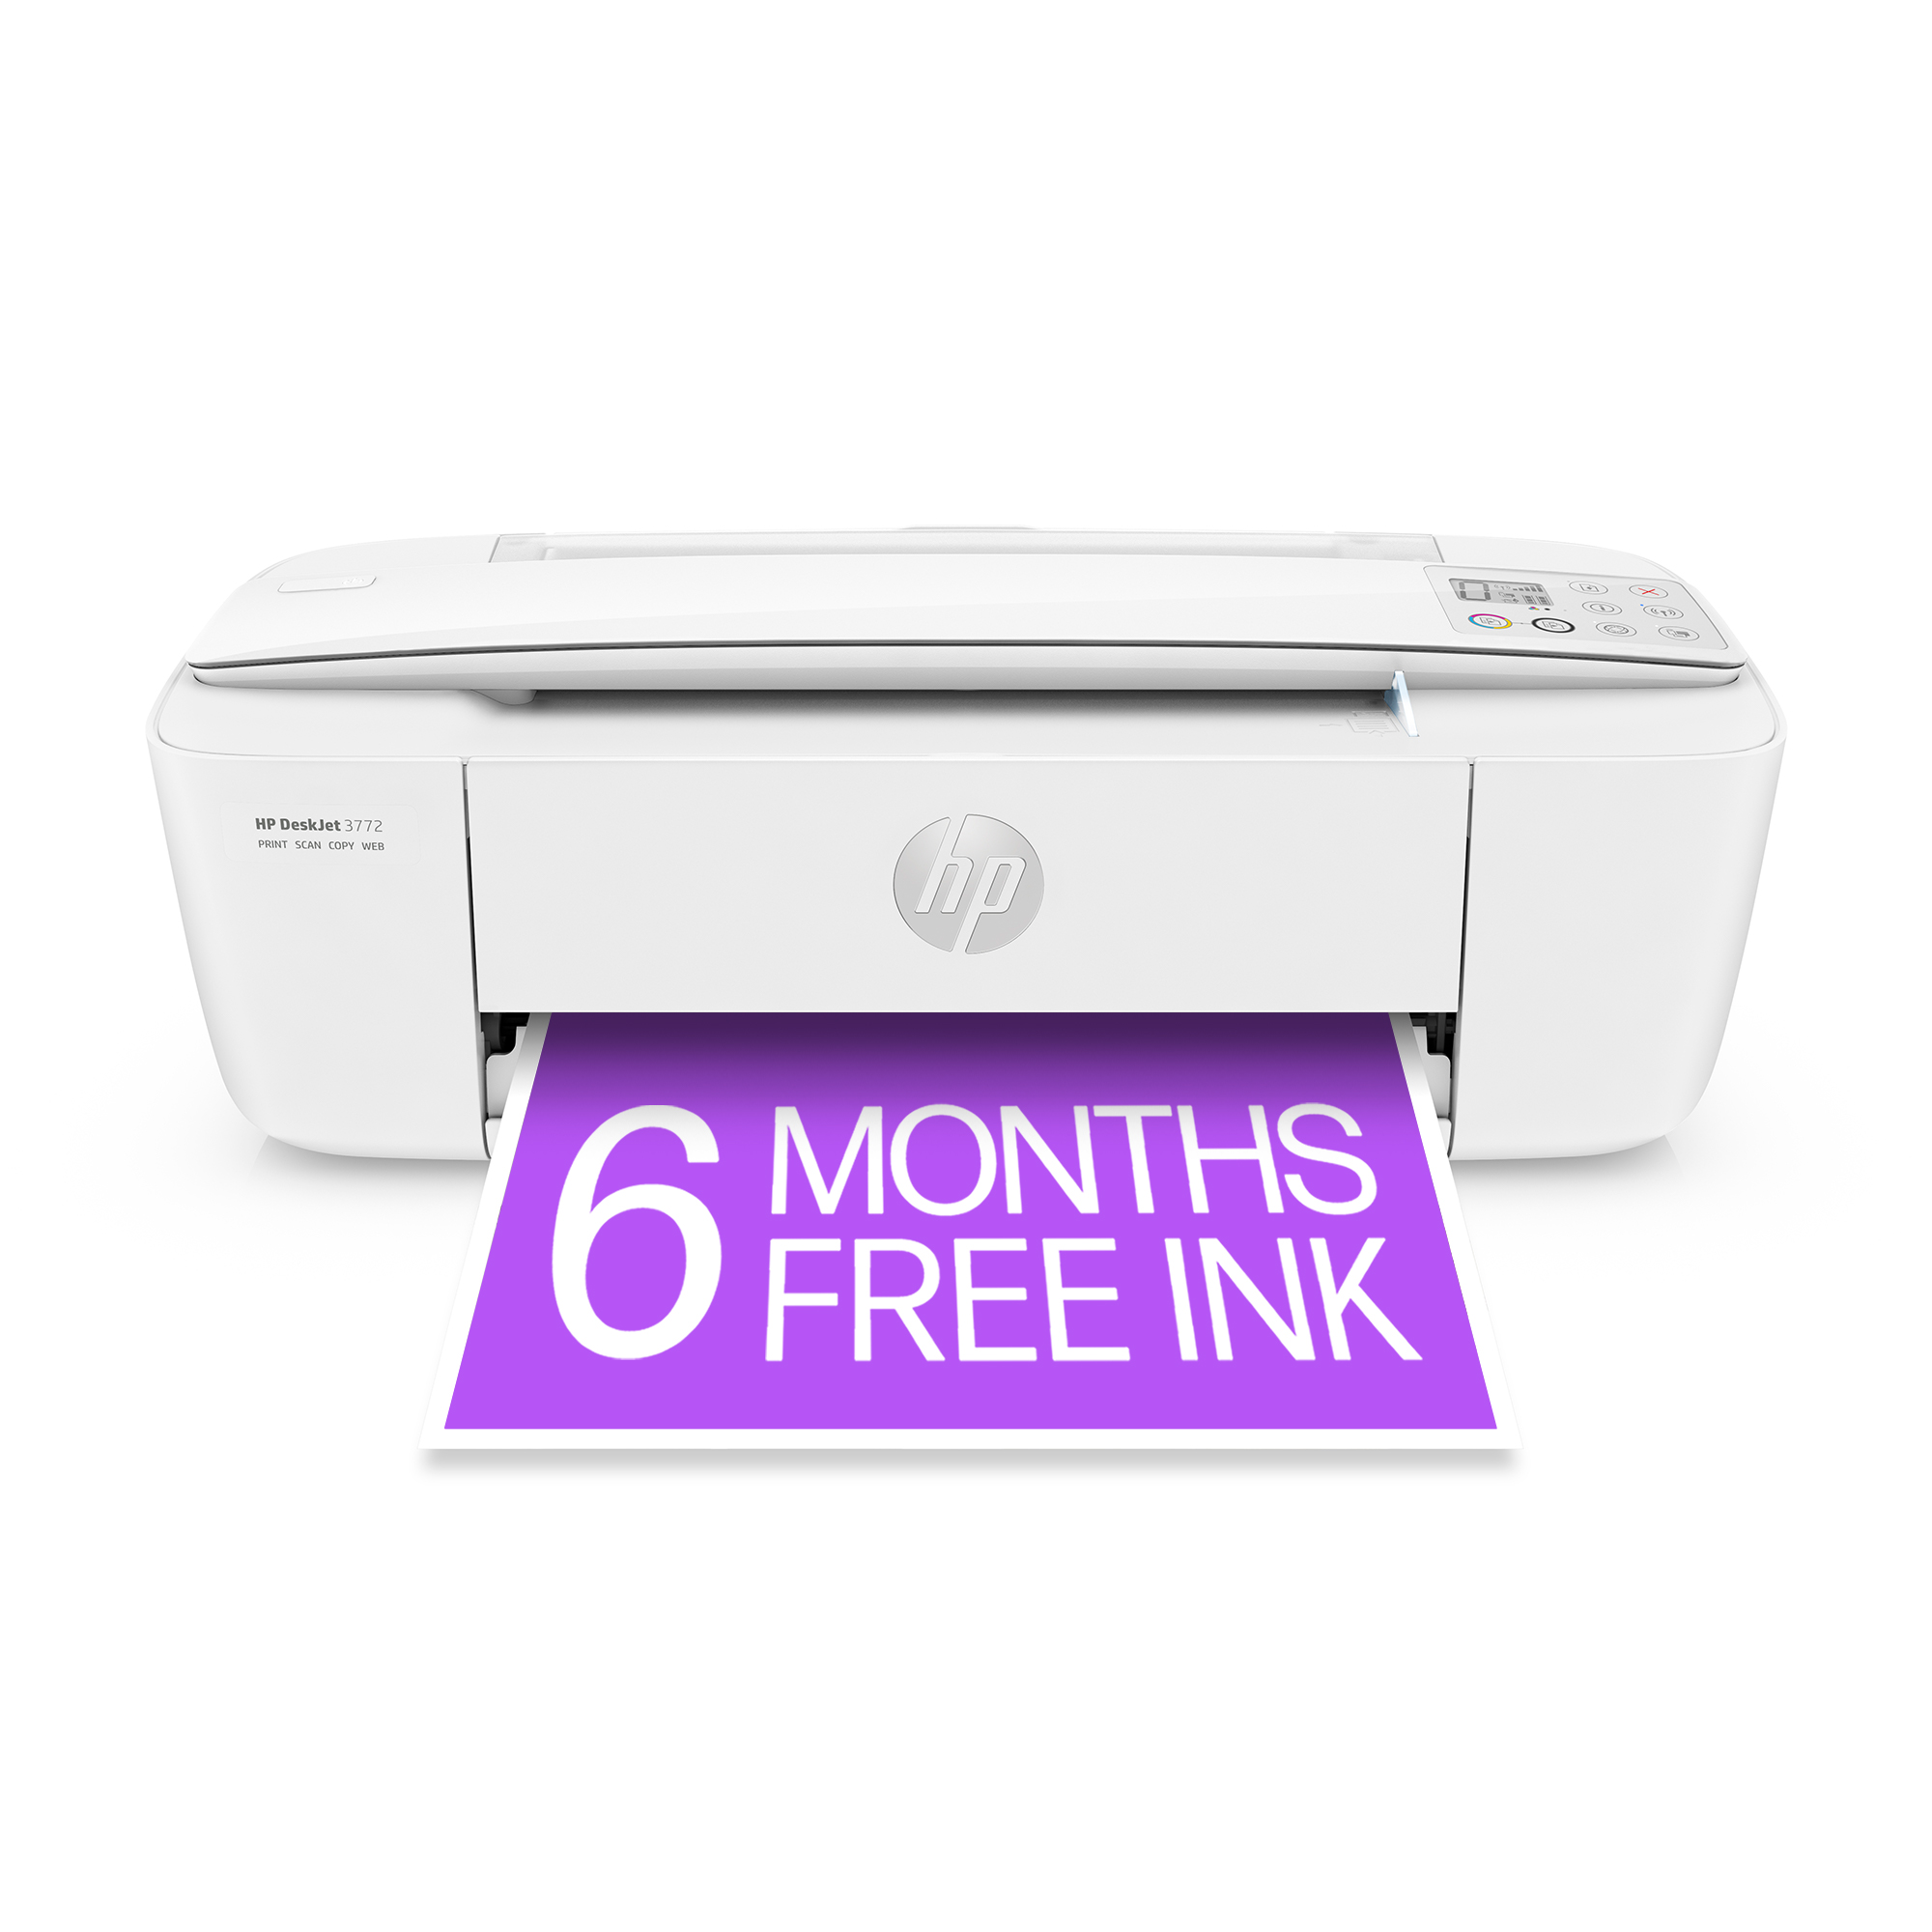 HP DeskJet 3772 All-in-One Wireless Color Inkjet Printer, 6 Months FREE ink with HP Instant Ink - image 1 of 11